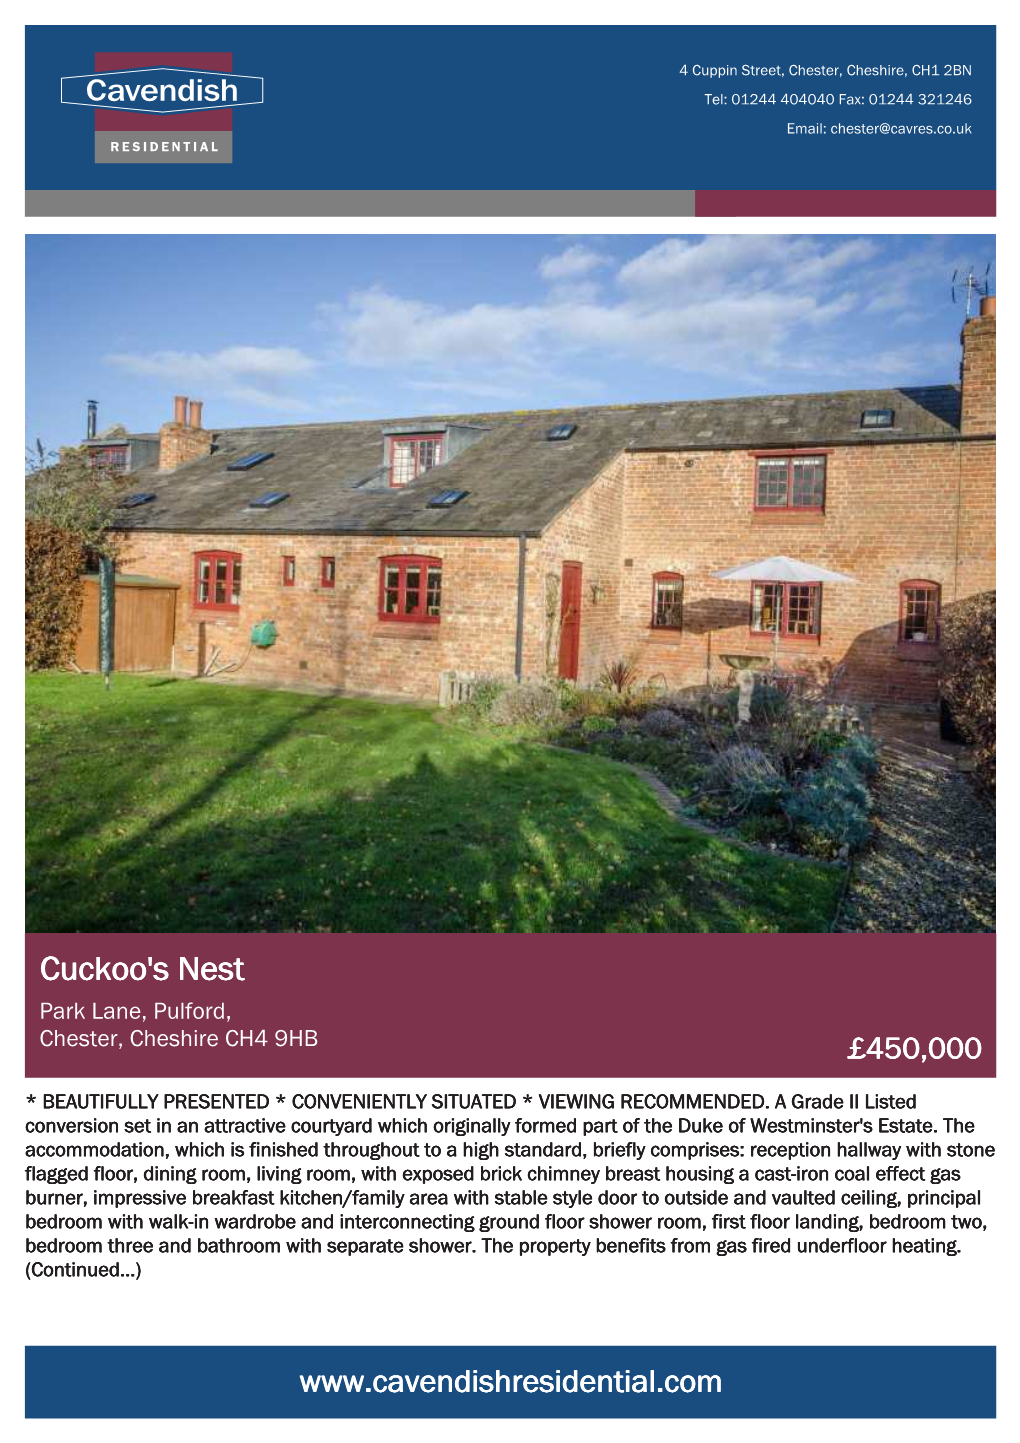 Cuckoo's Nest Park Lane, Pulford, Chester, Cheshire CH4 9HB £450,000